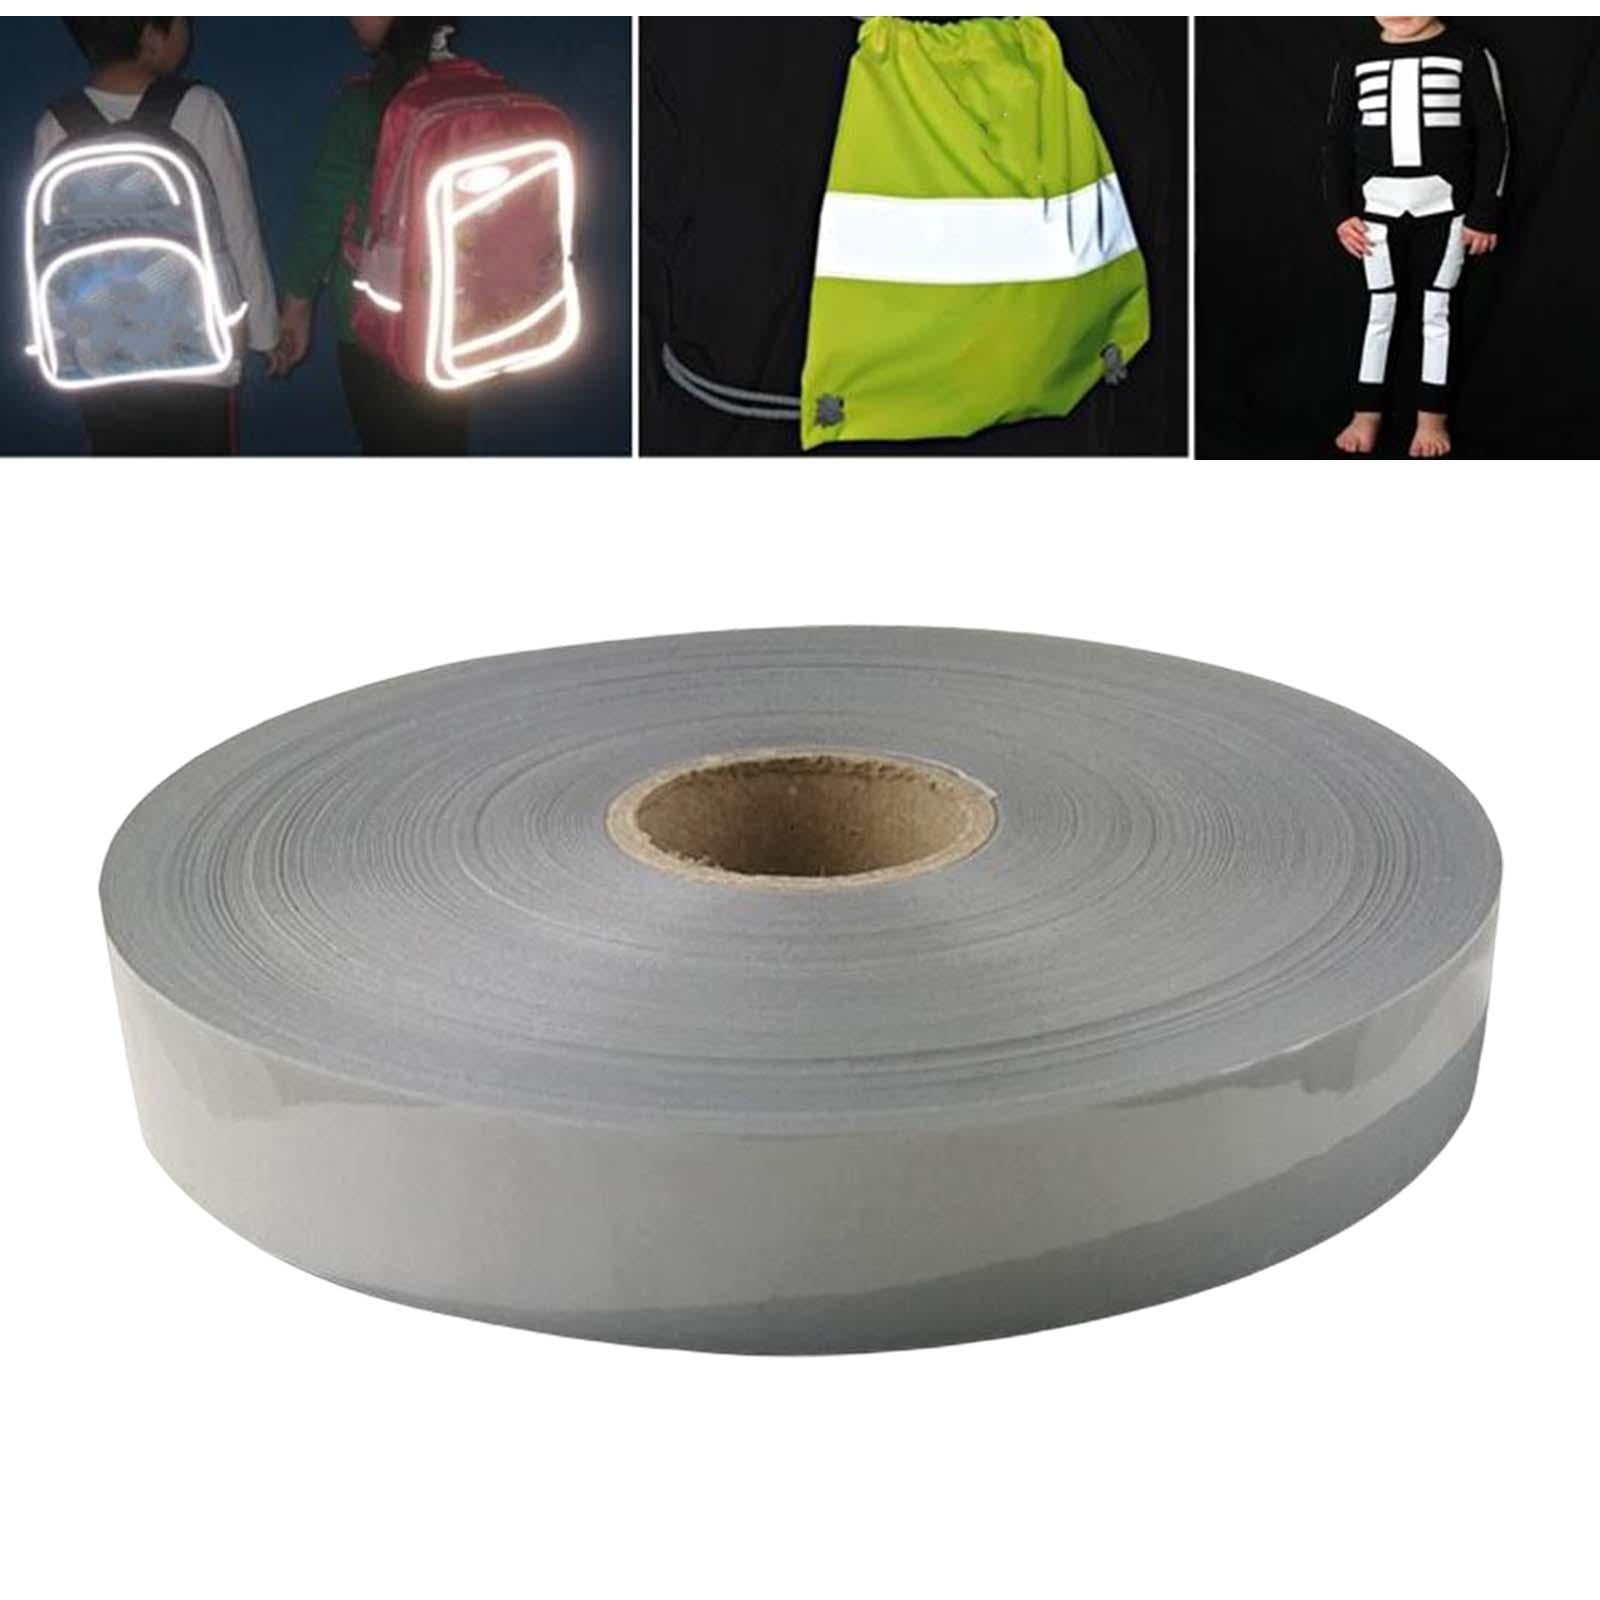 5 Rolls Men Tank Top Fabric Tape for Clothes Reflective Tape for Clothing  Reflective Fabric Reflective Clothing Tape Man 